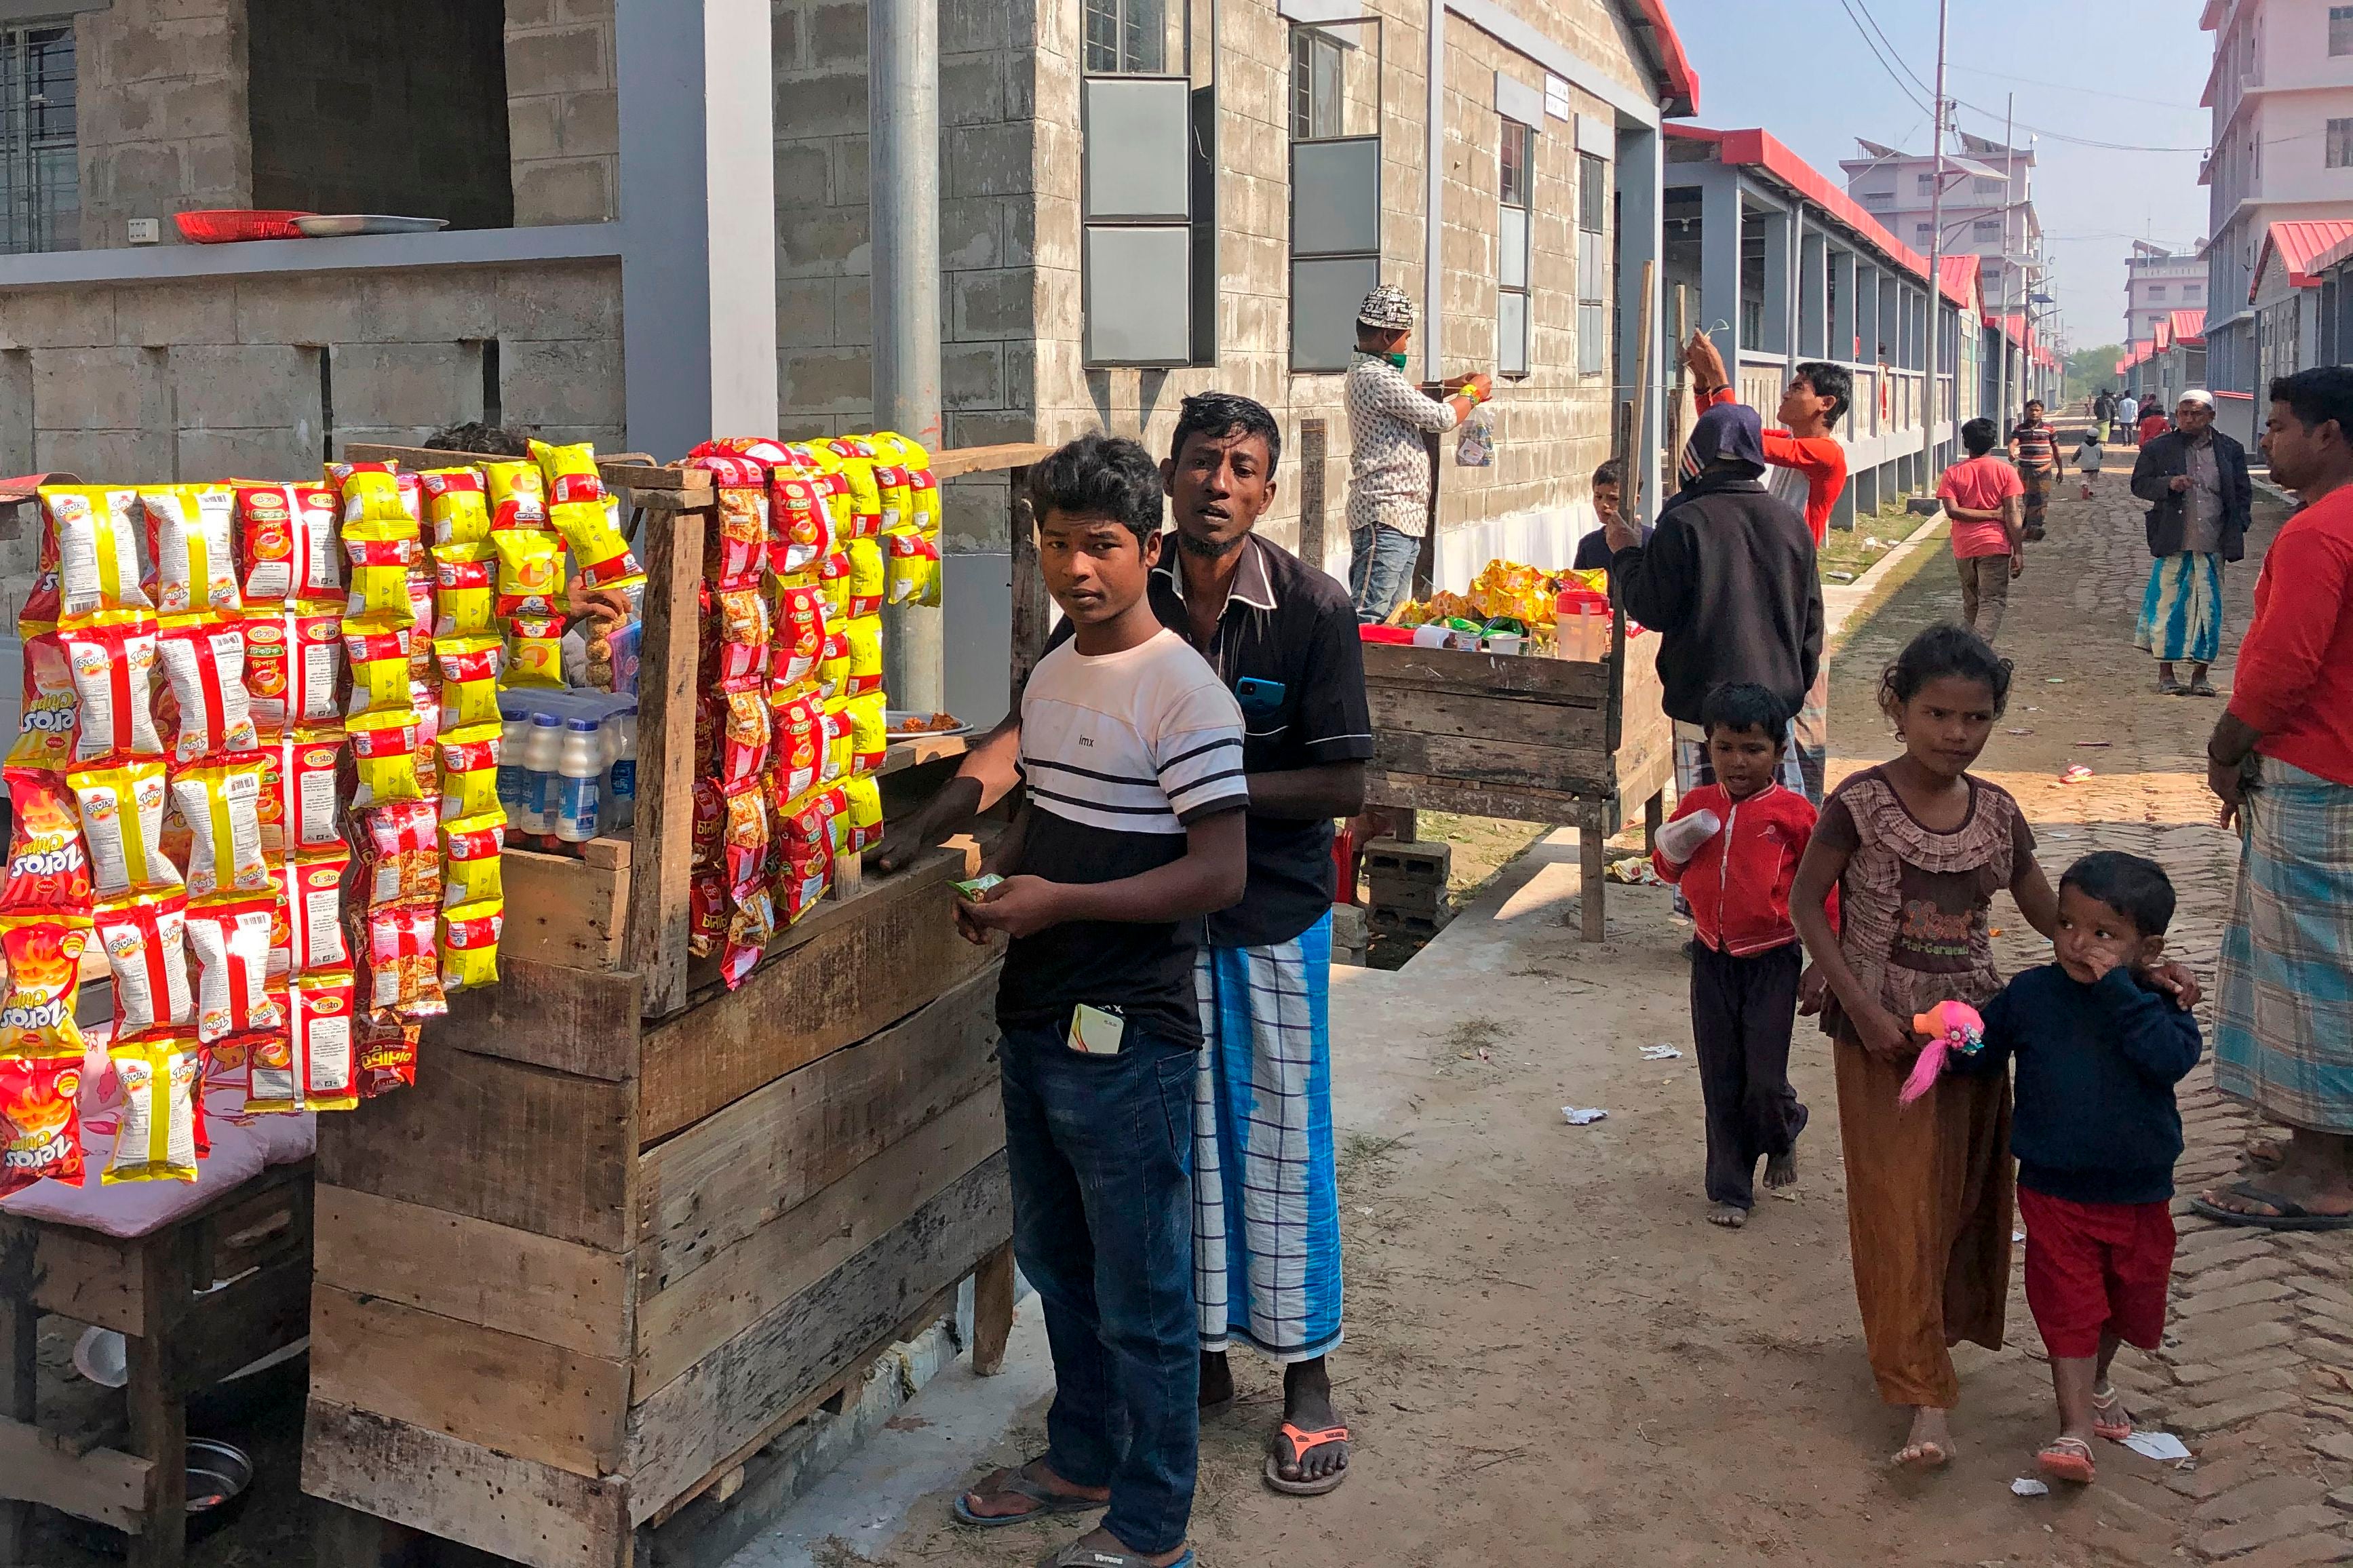 Rohingya refugees are seen next to food stalls